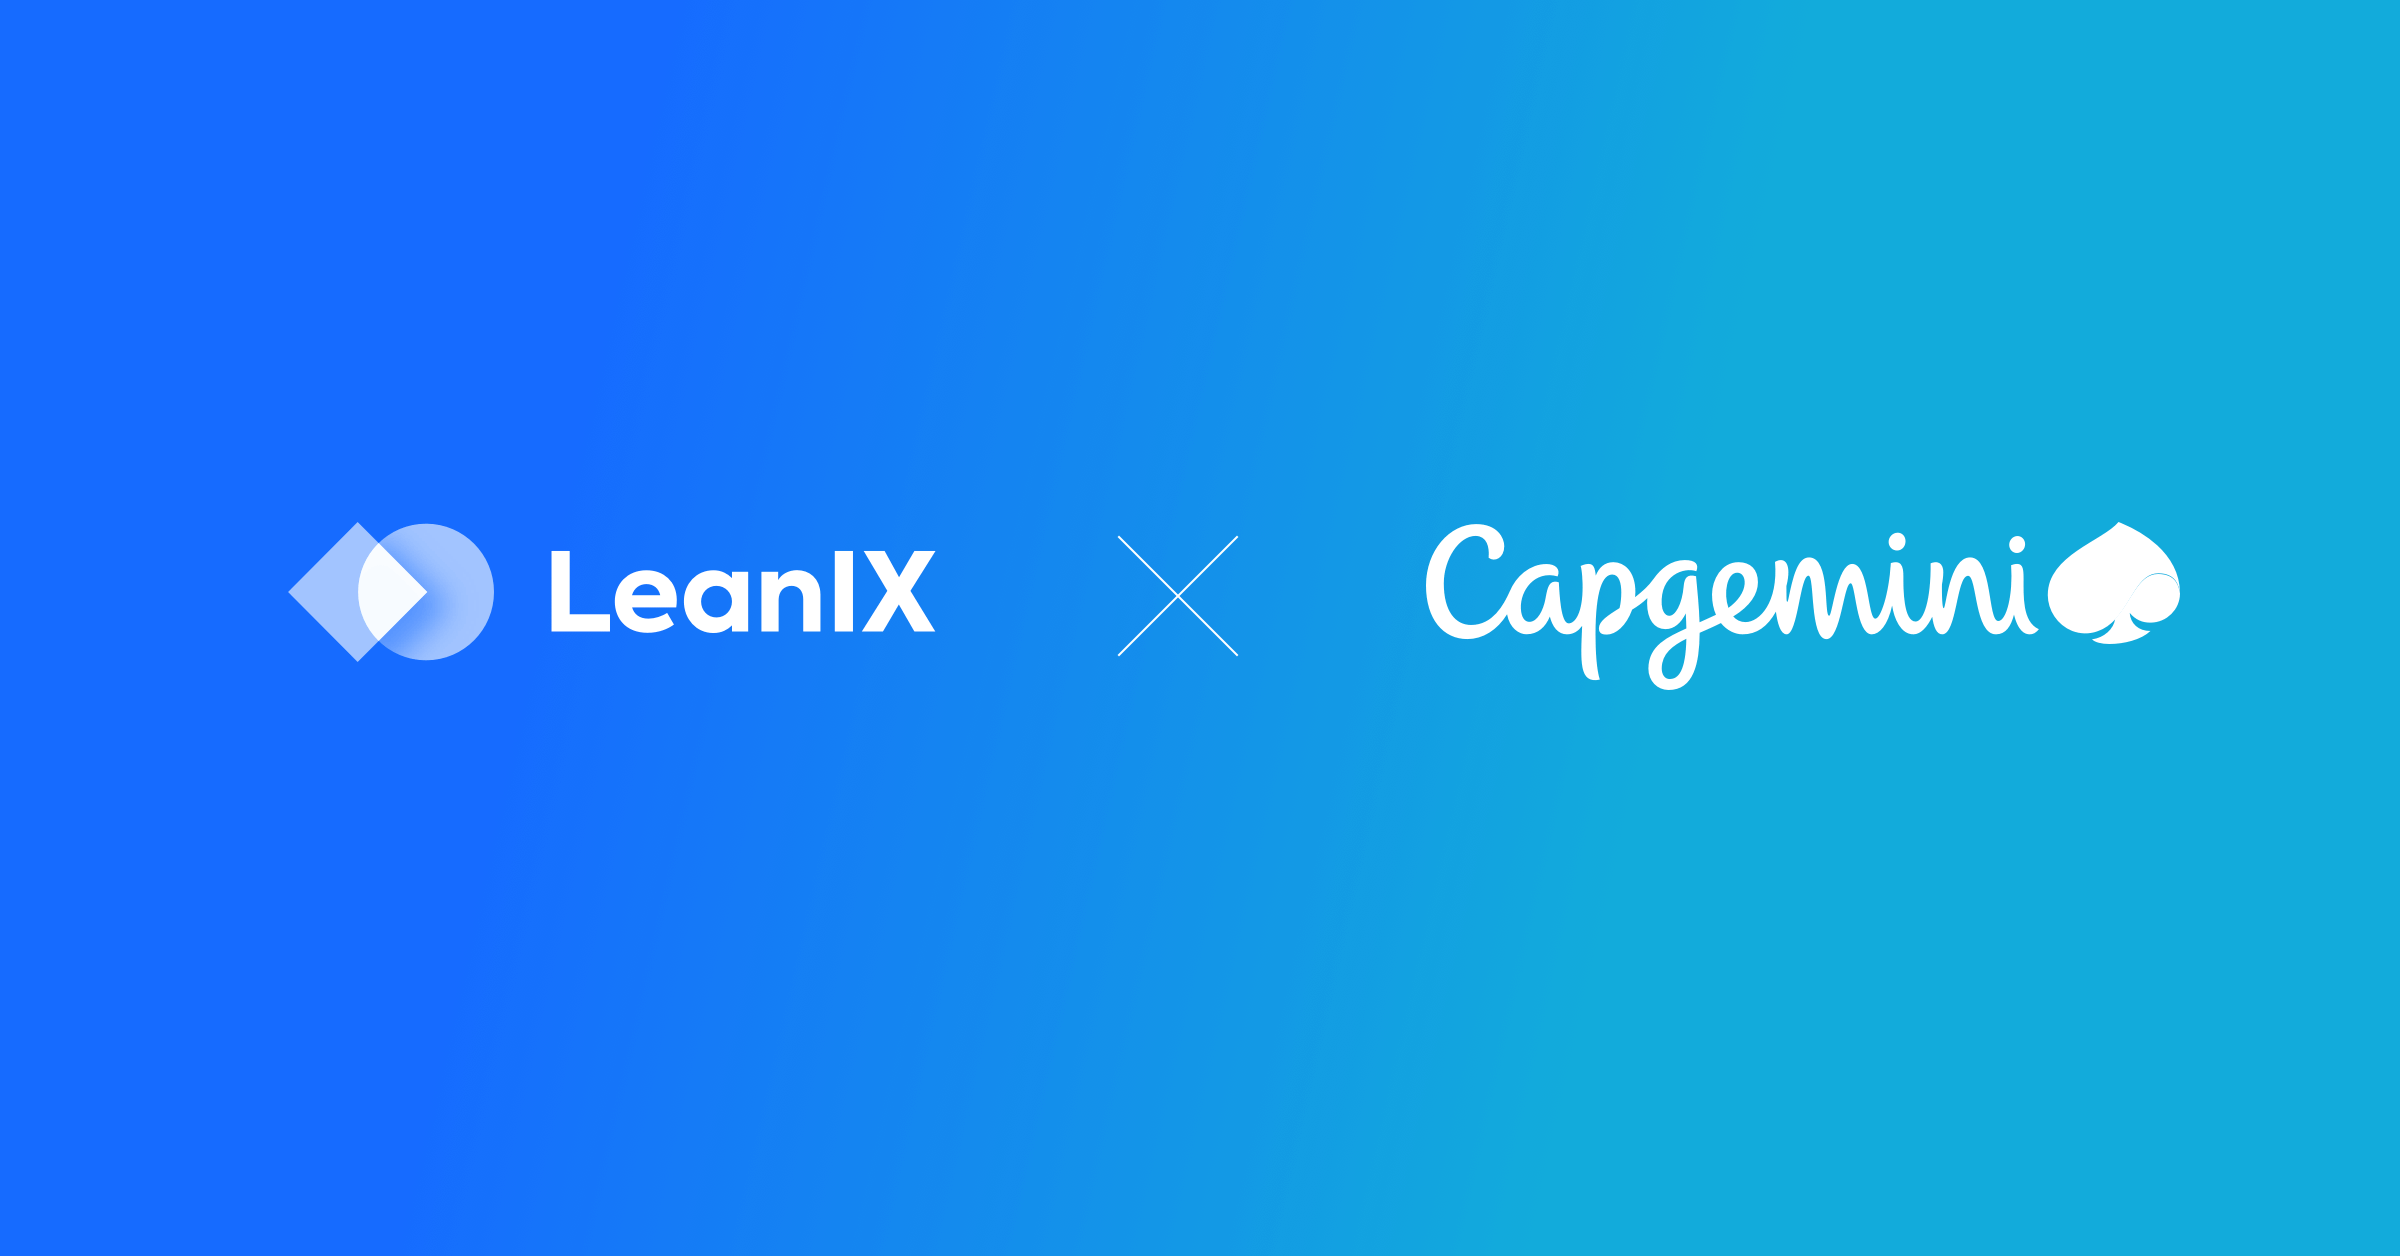 Capgemini LeanIX Working Together Toward Continuous Transformation